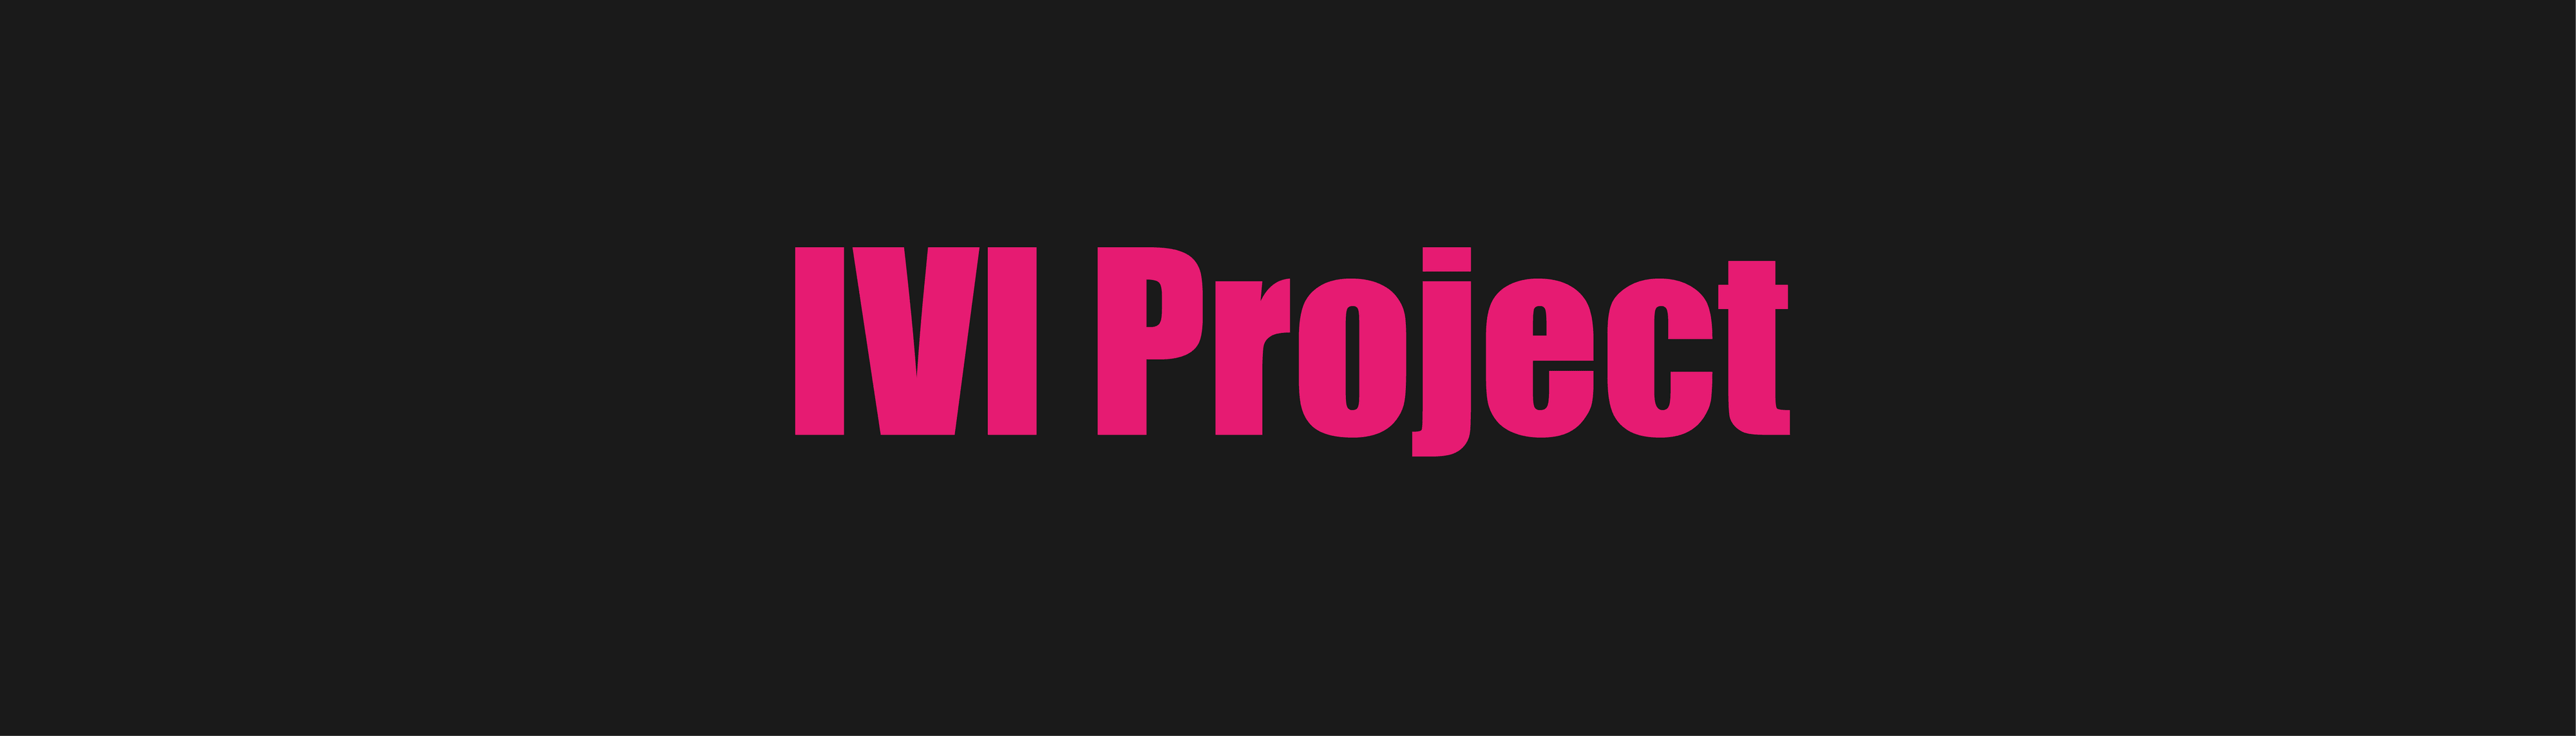 ivi_project banner